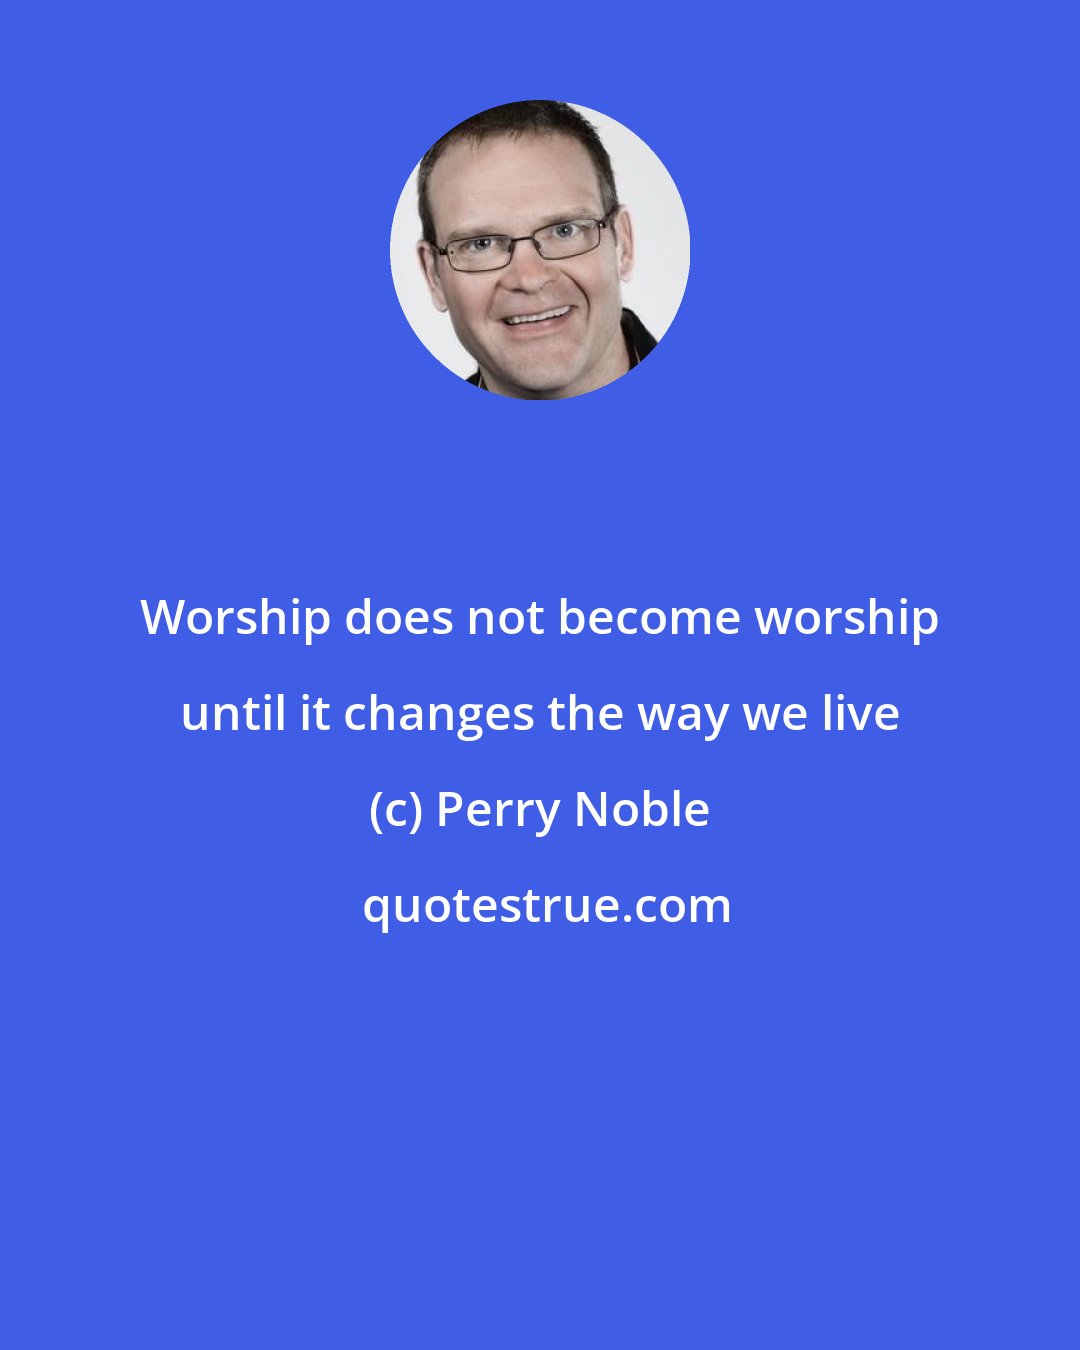 Perry Noble: Worship does not become worship until it changes the way we live